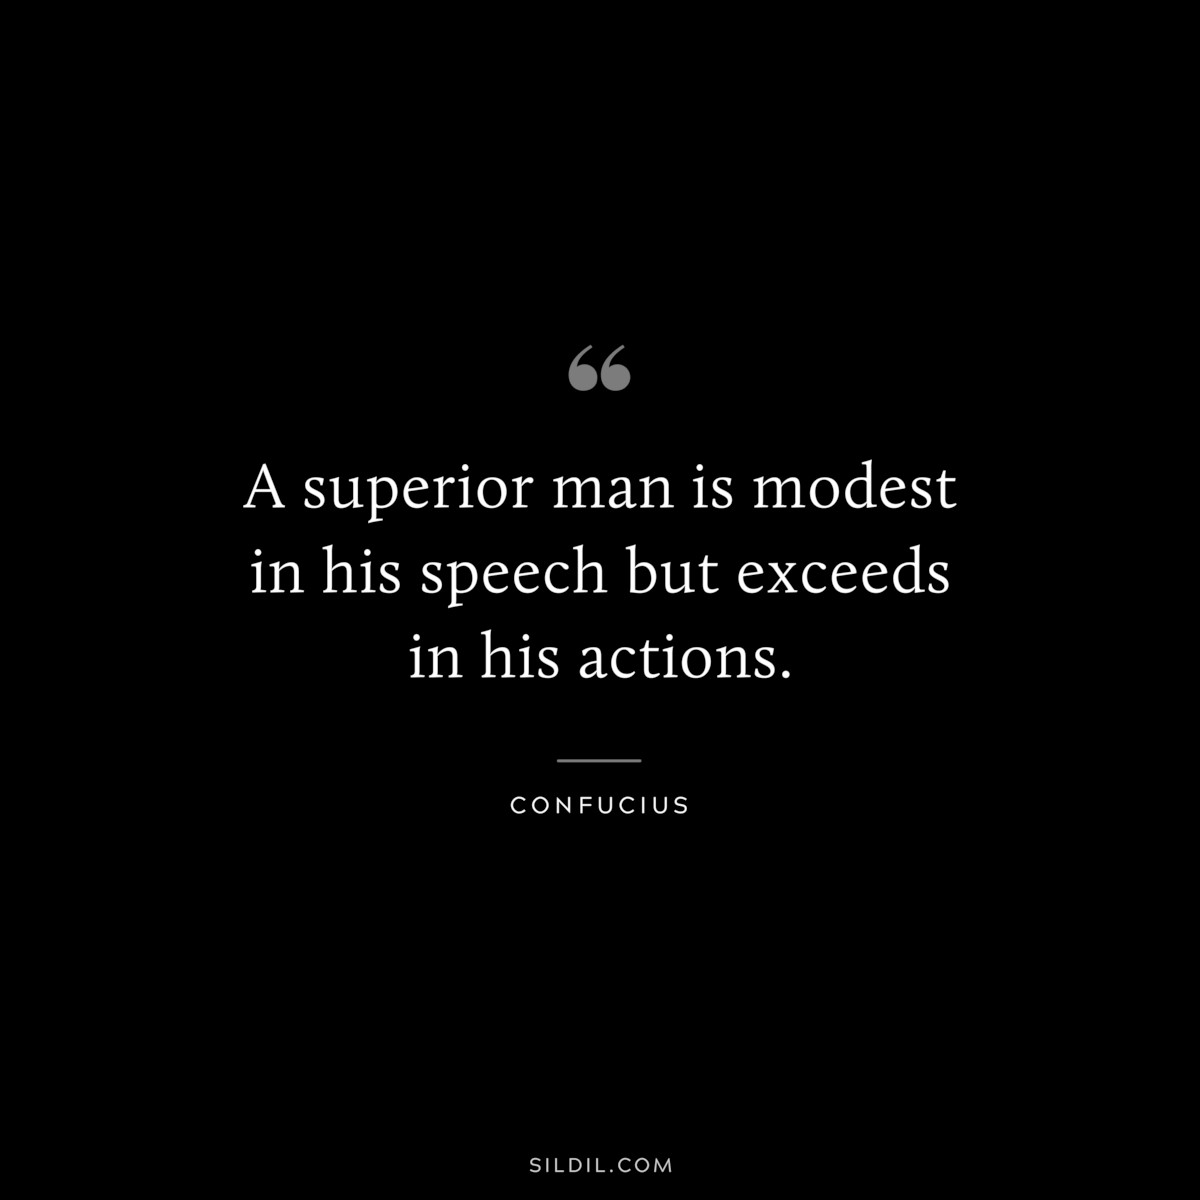 A superior man is modest in his speech but exceeds in his actions. ― Confucius